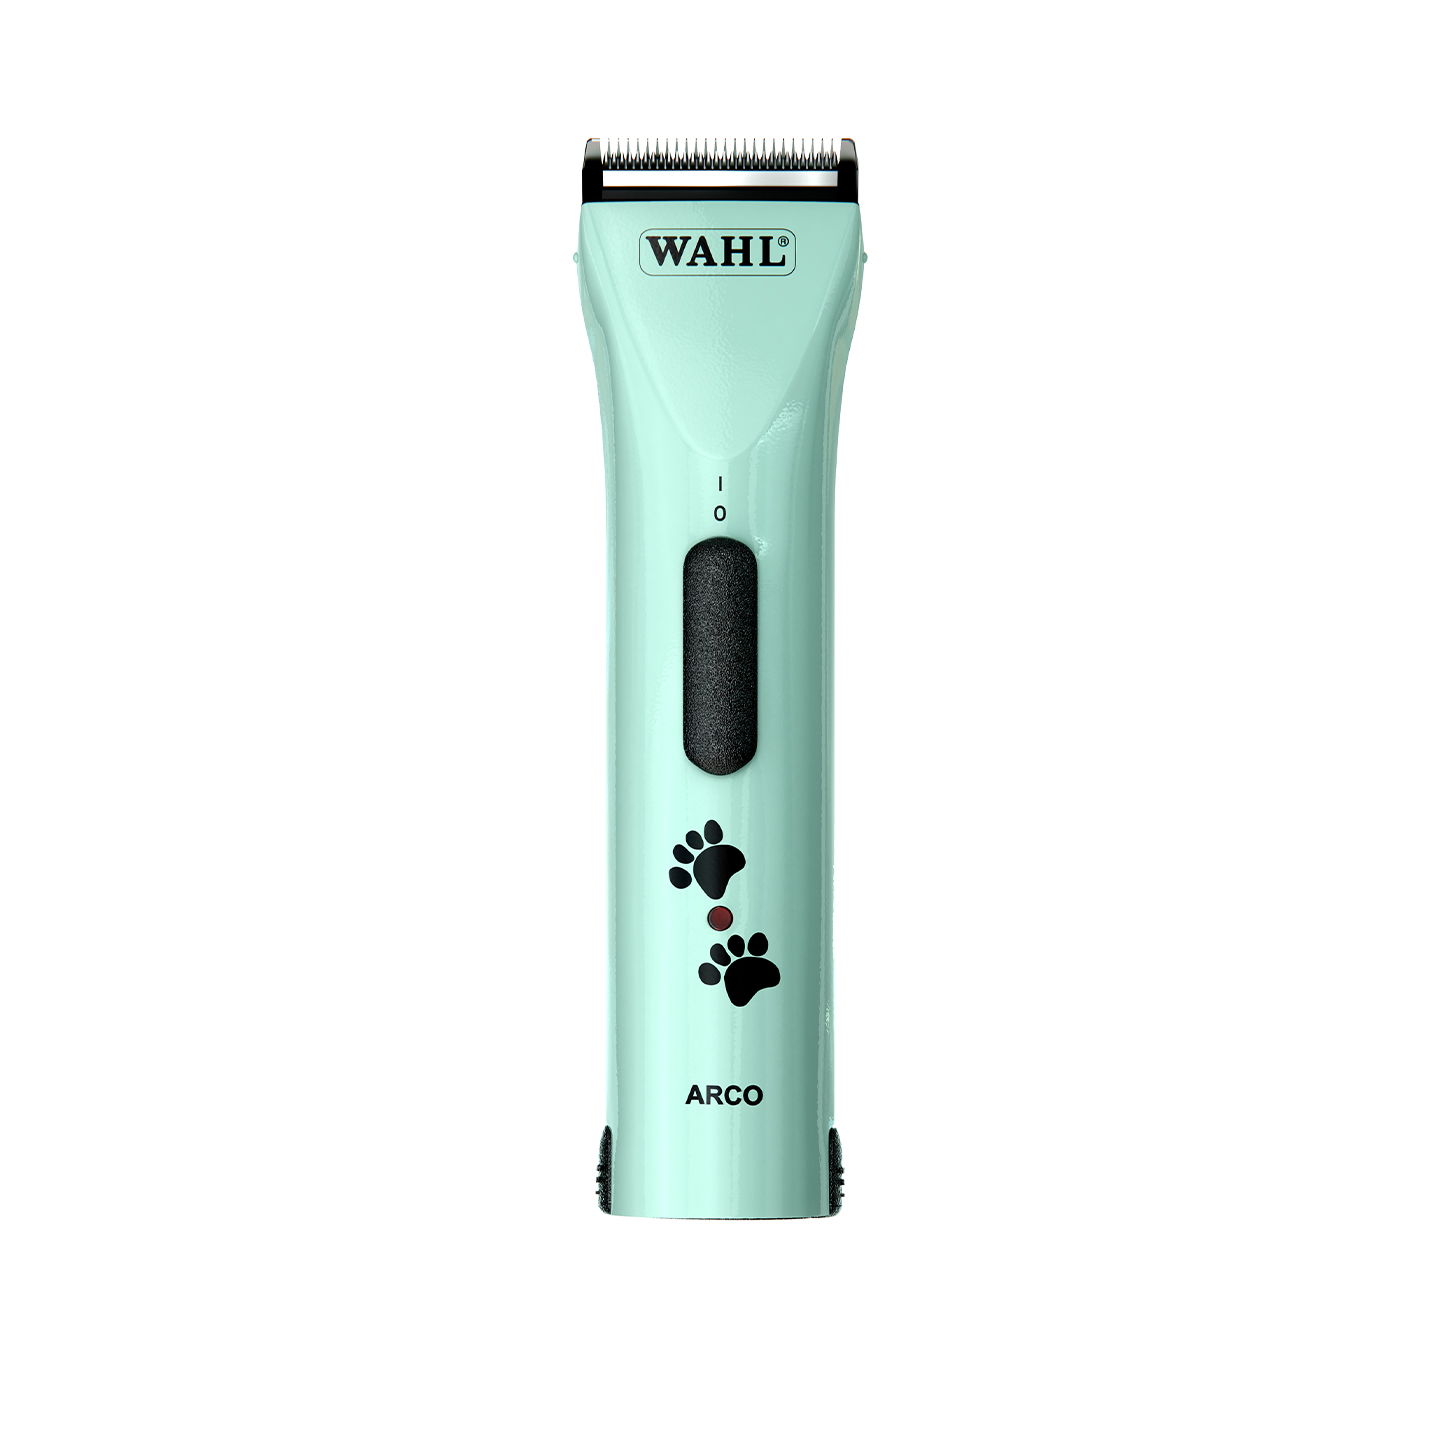 wahl arco dog clippers uk